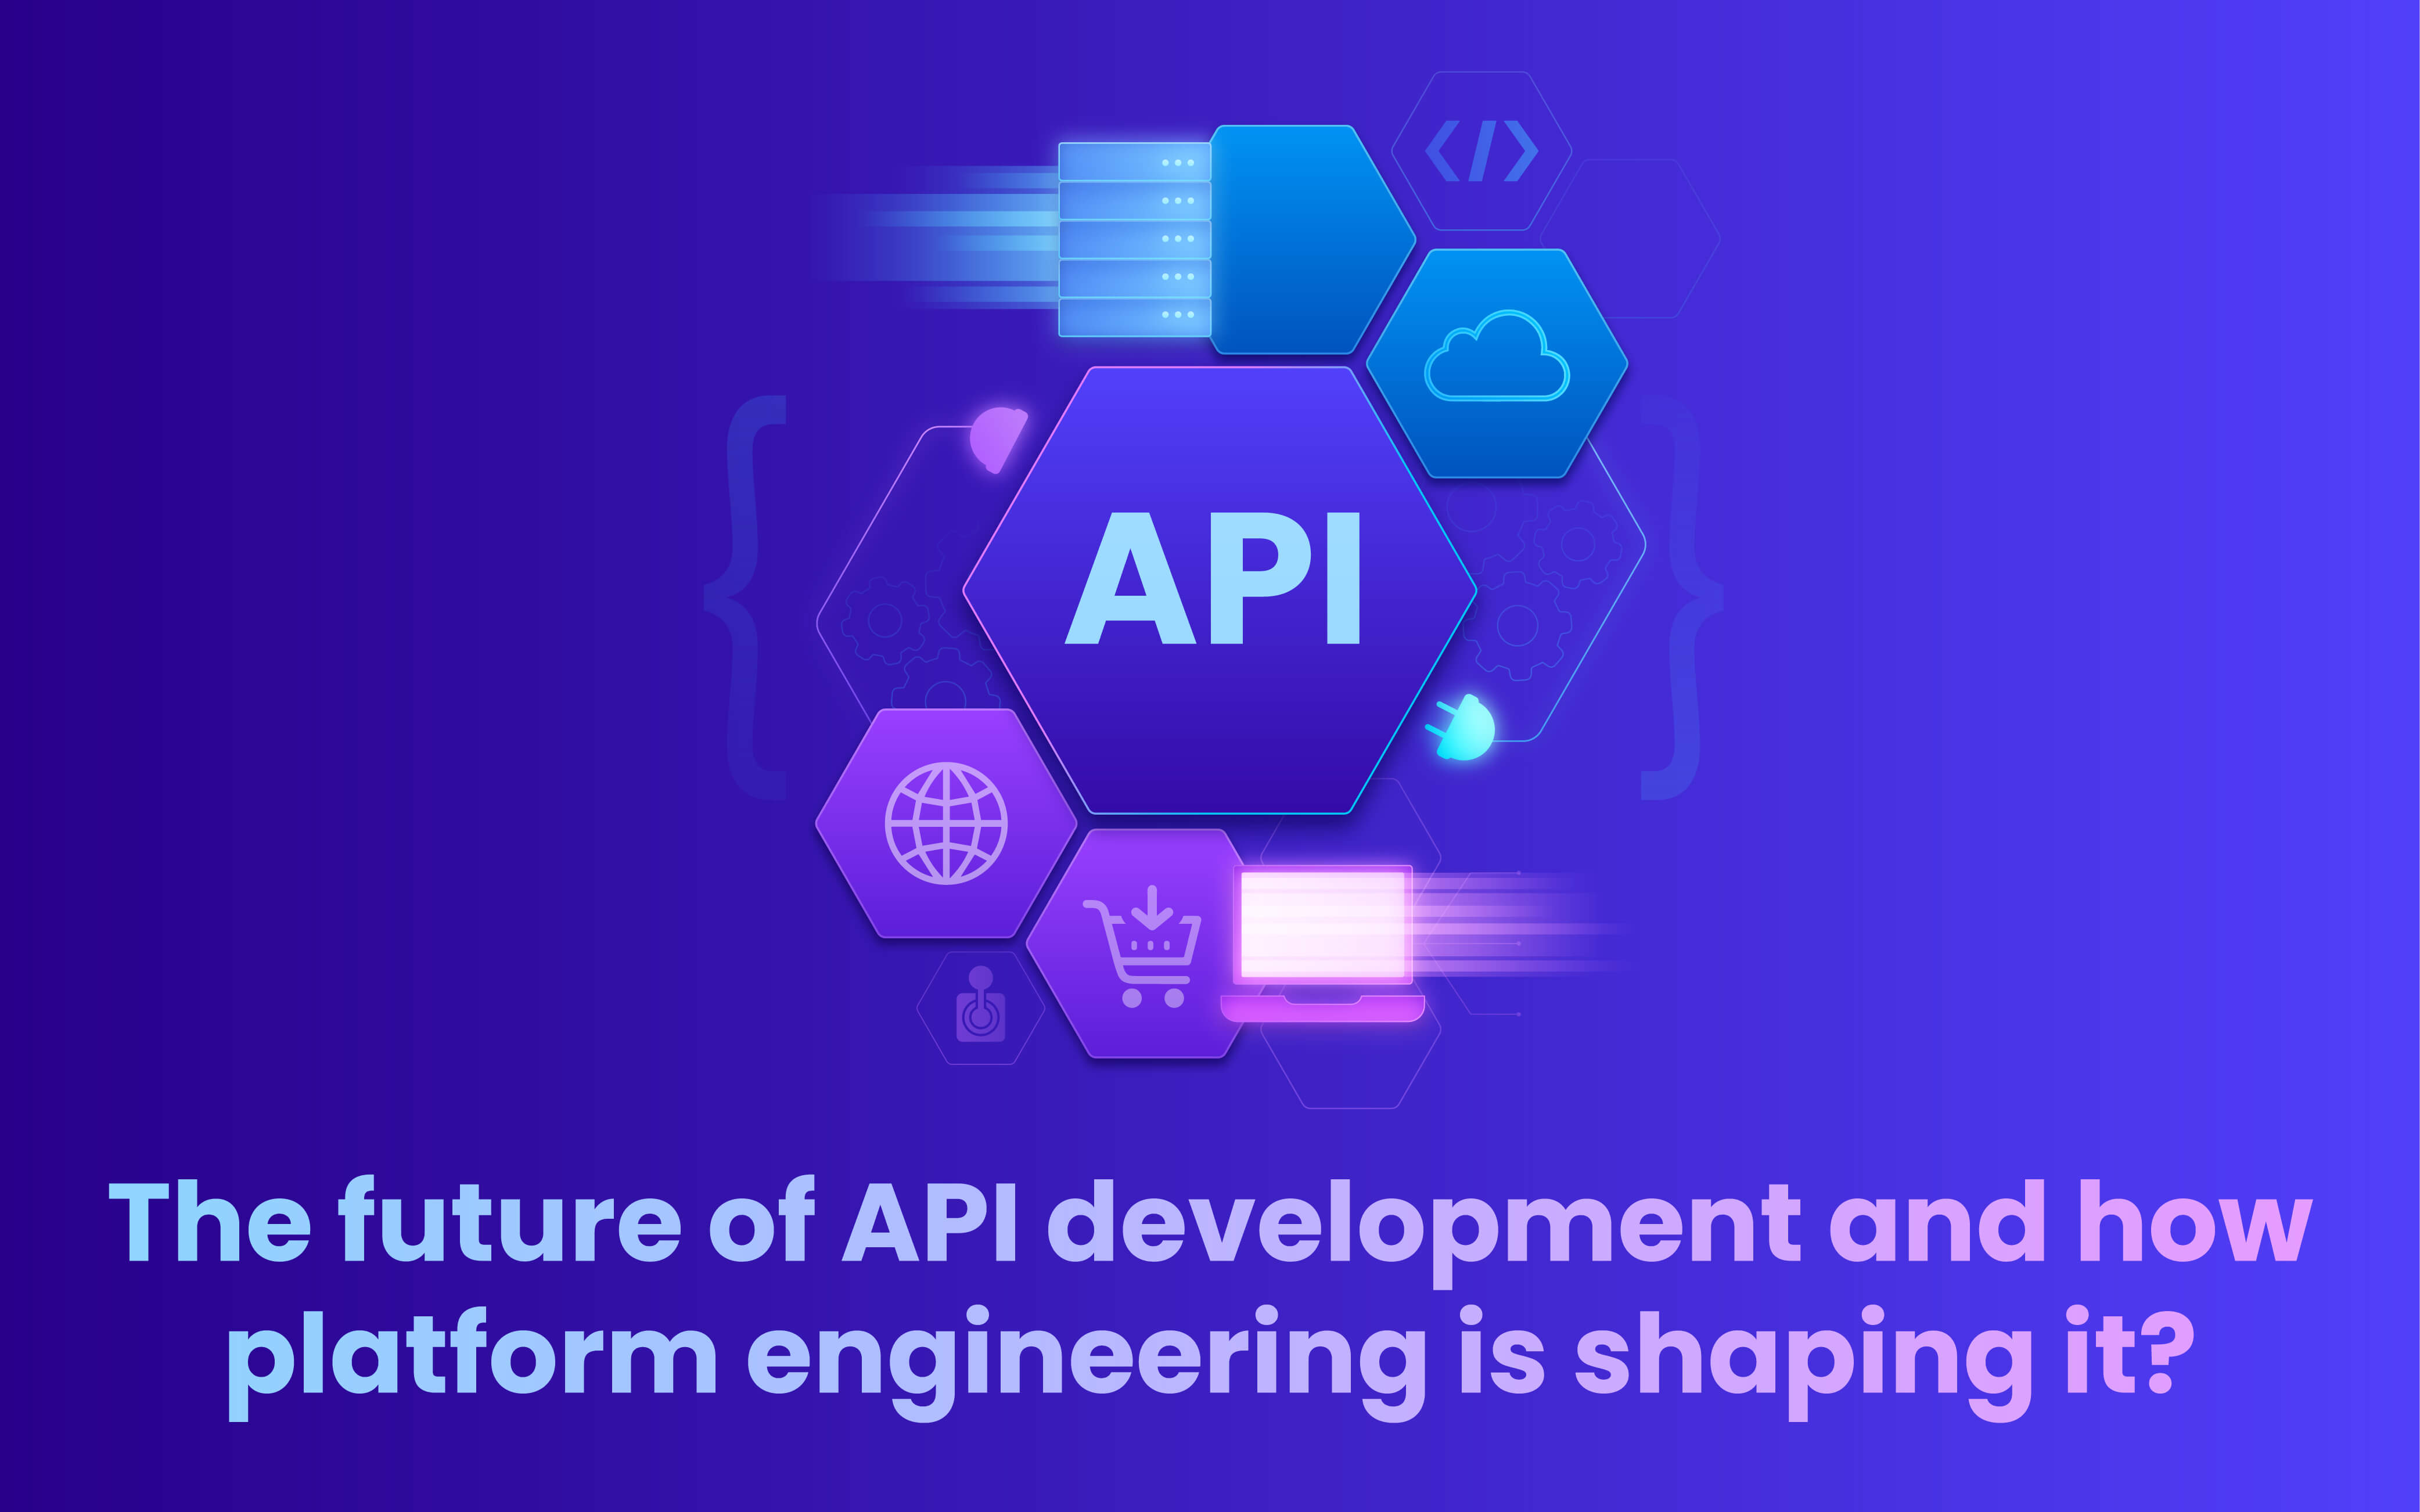 The Future of API Development and How Platform Engineering is Shaping it?